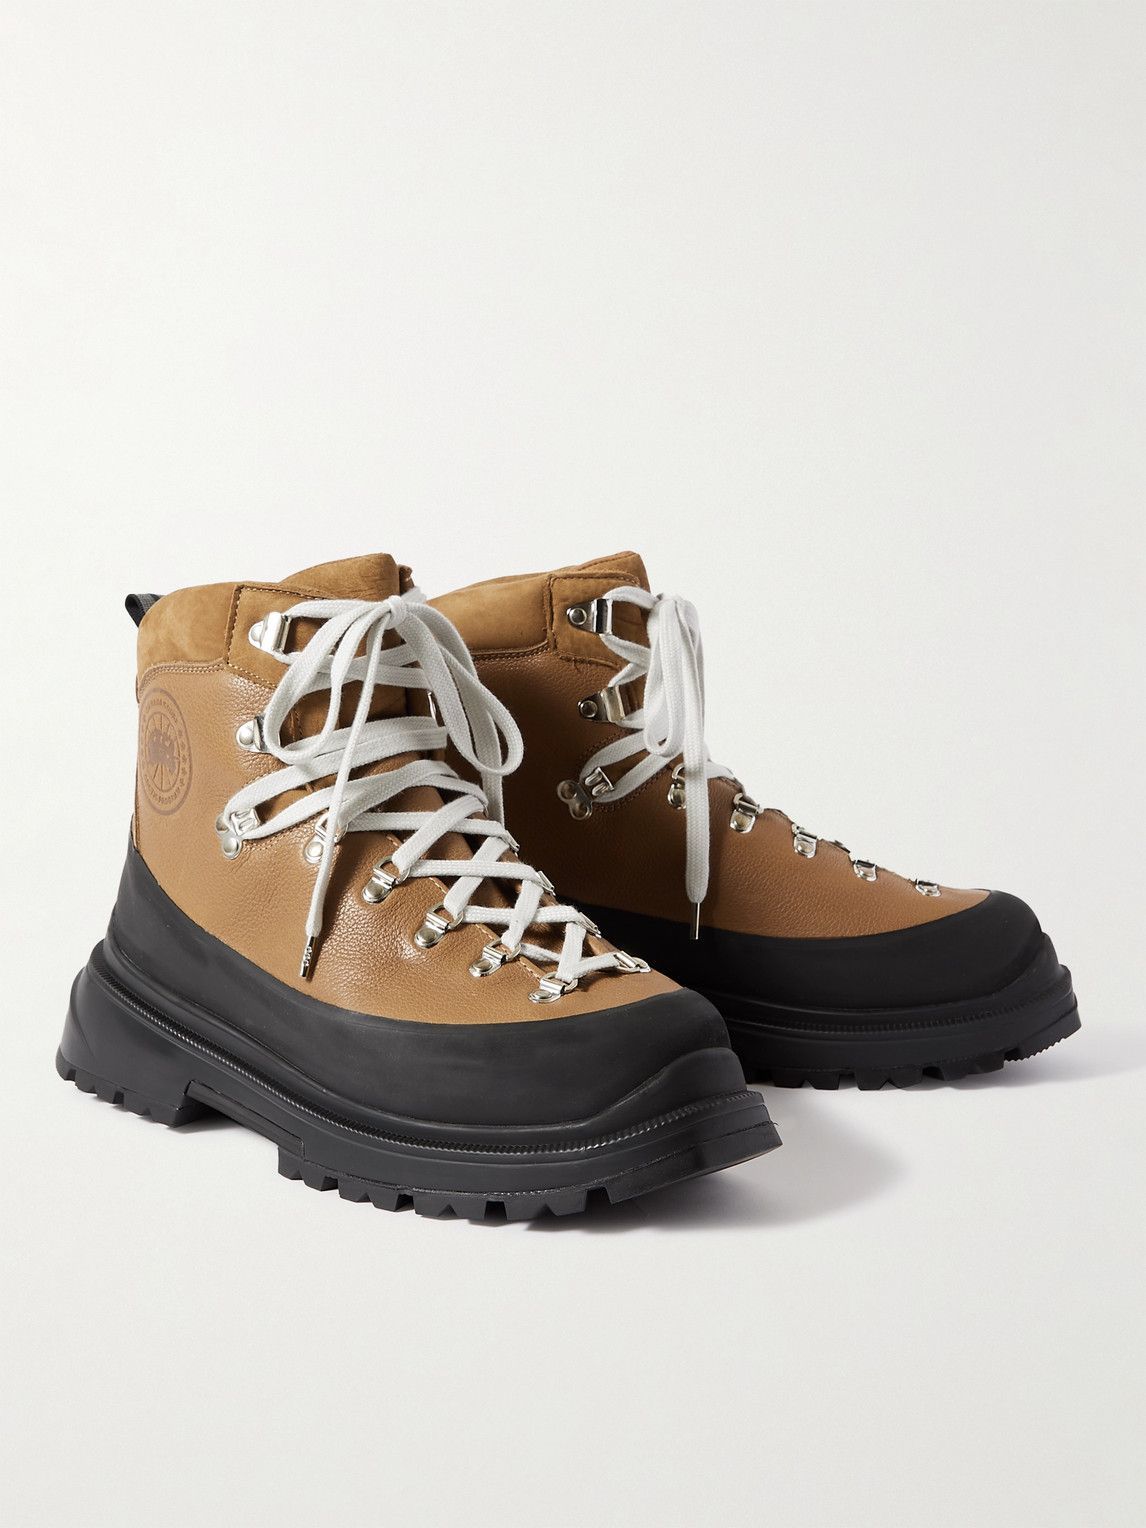 journey boots canada goose